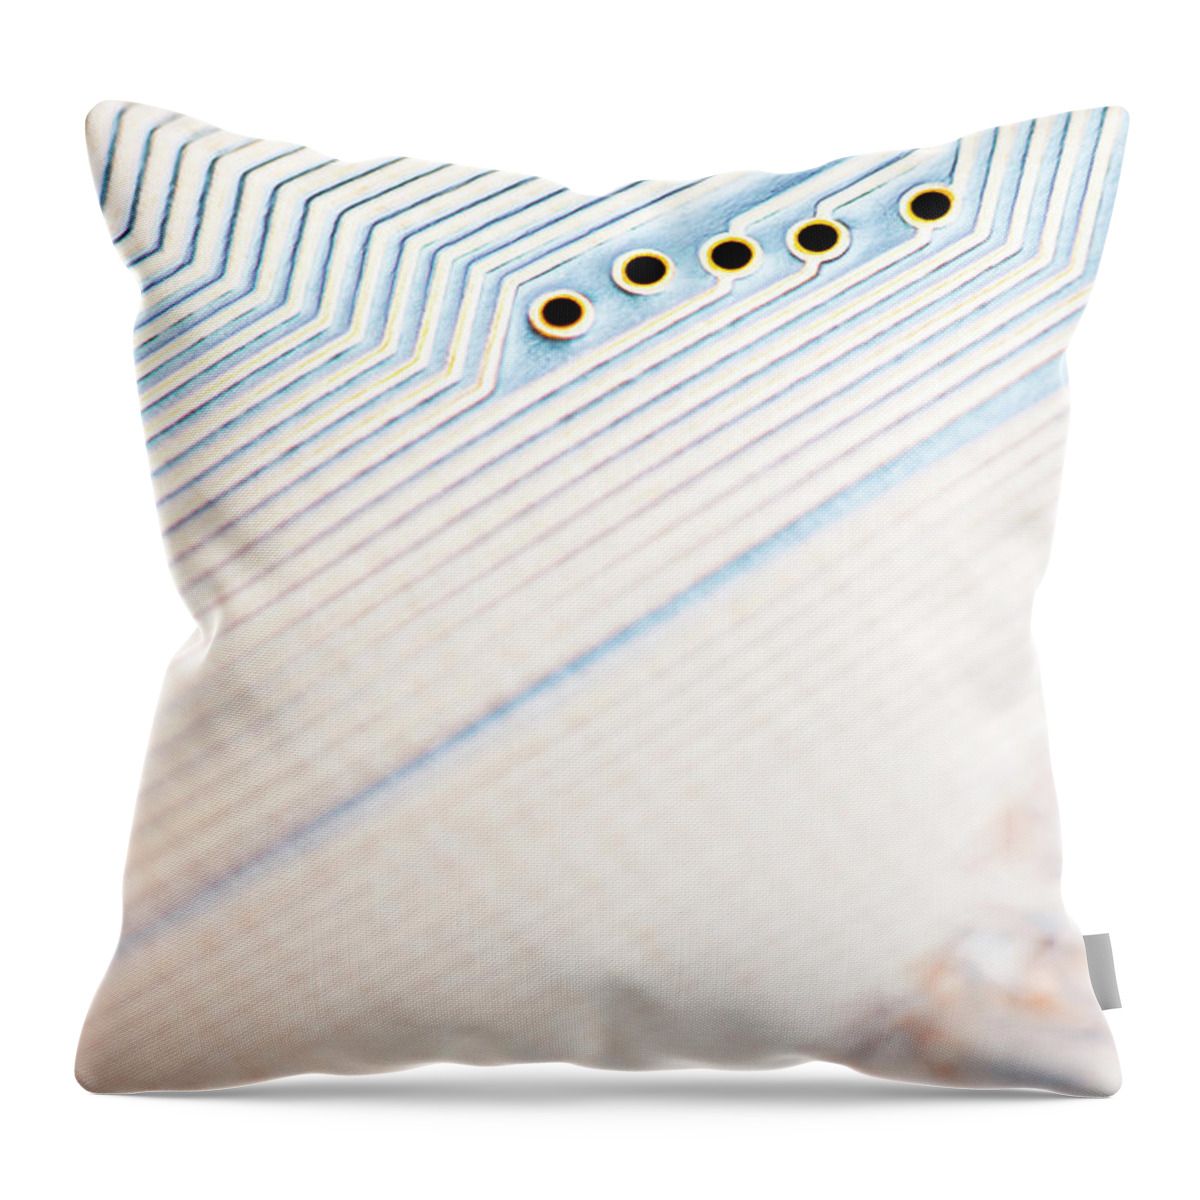 Electrical Component Throw Pillow featuring the photograph Close-up Of A Circuit Board #5 by Nicholas Rigg